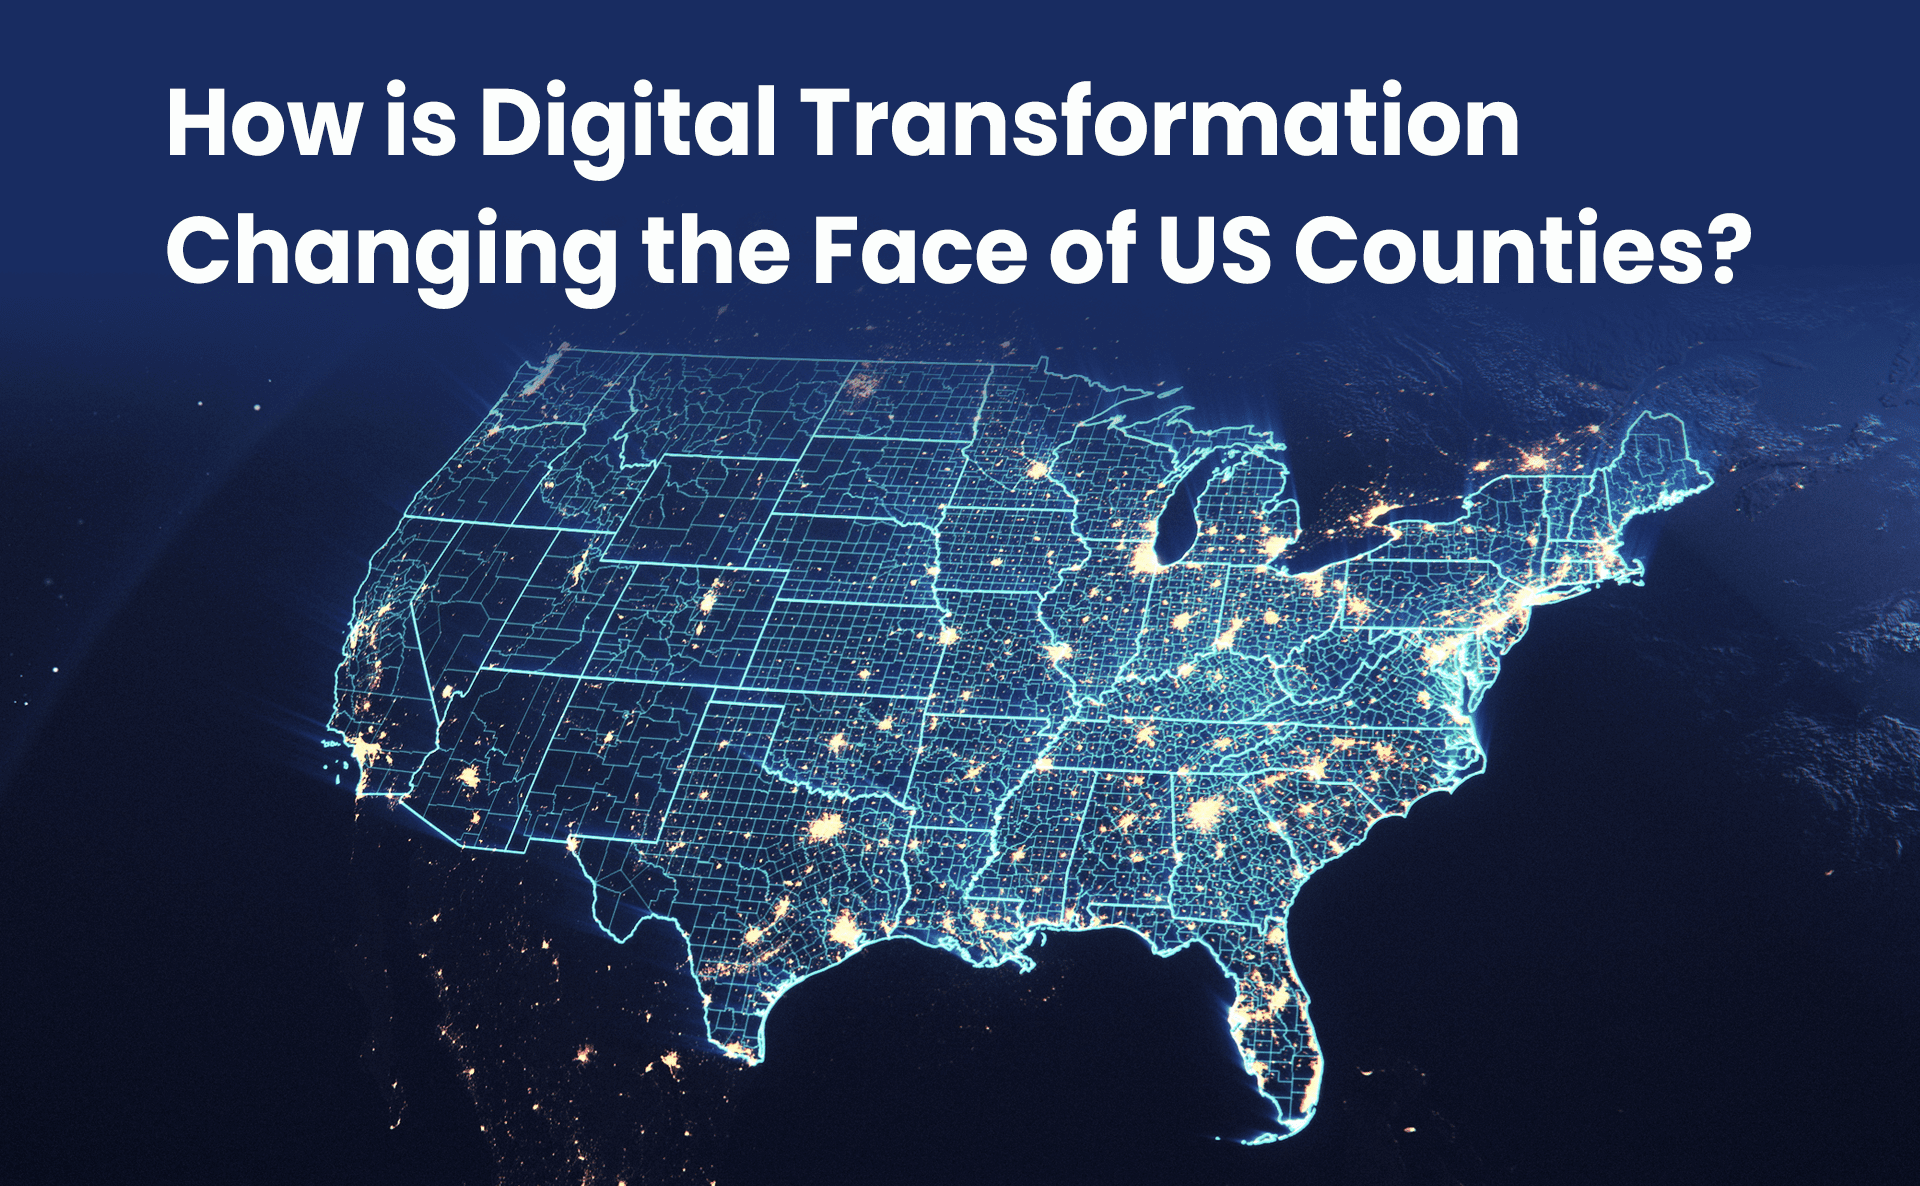 How is digital transformation changing the face of US Counties?